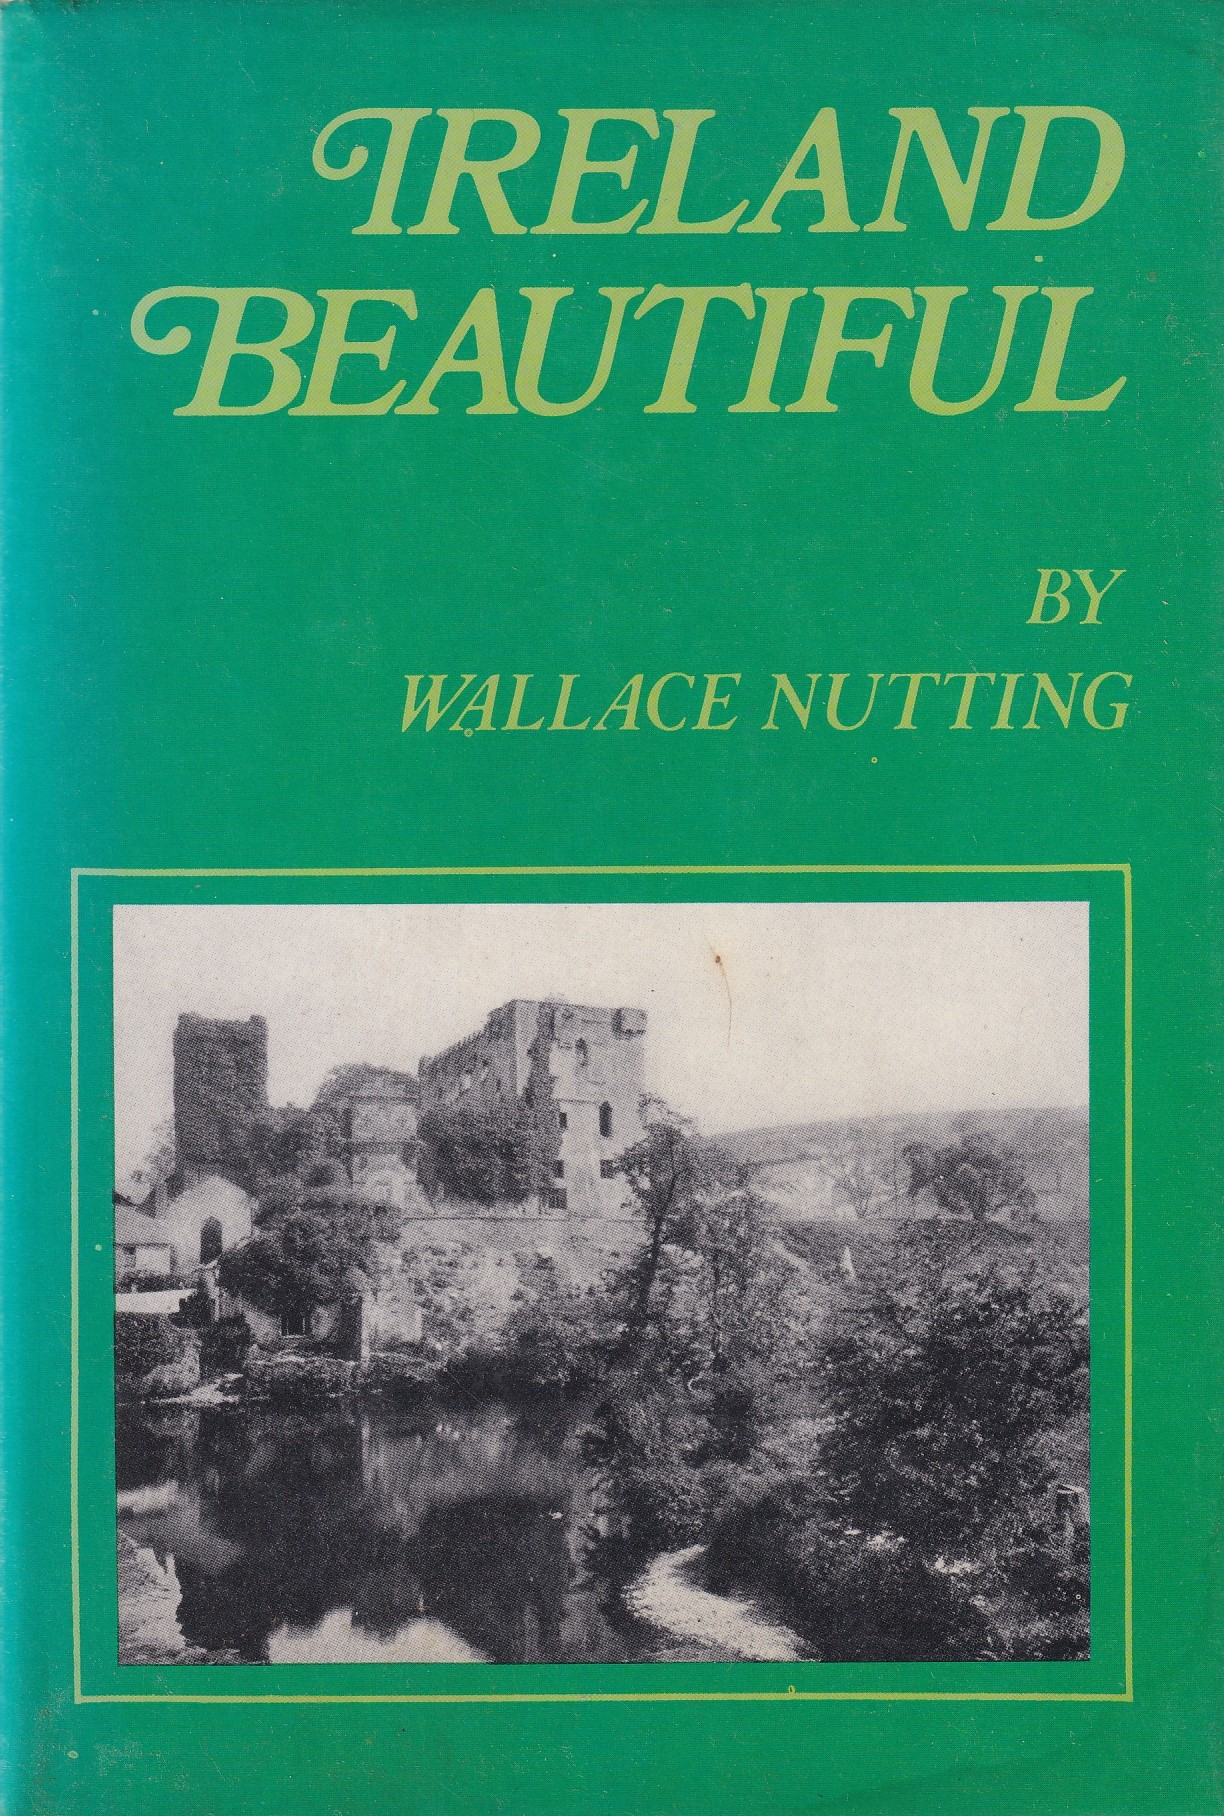 Ireland Beautiful | Nutting, Wallace | Charlie Byrne's